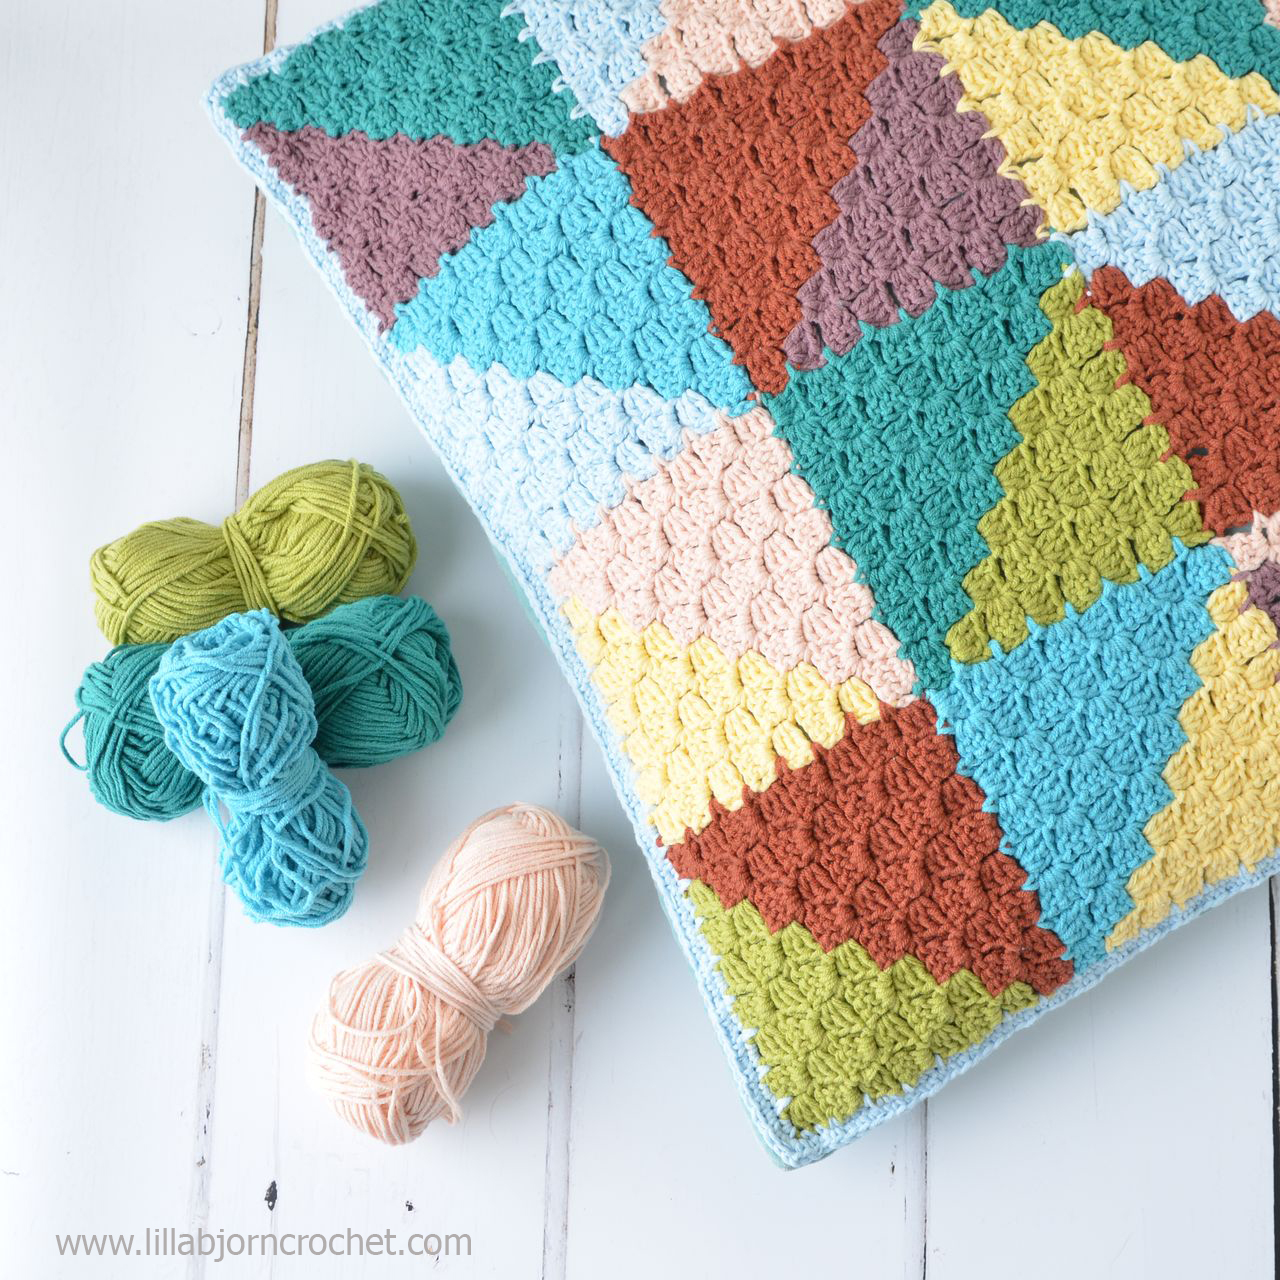 C2C Pastel Triangles pillow - join as you go - tutorial by www.lillabjorncrochet.com